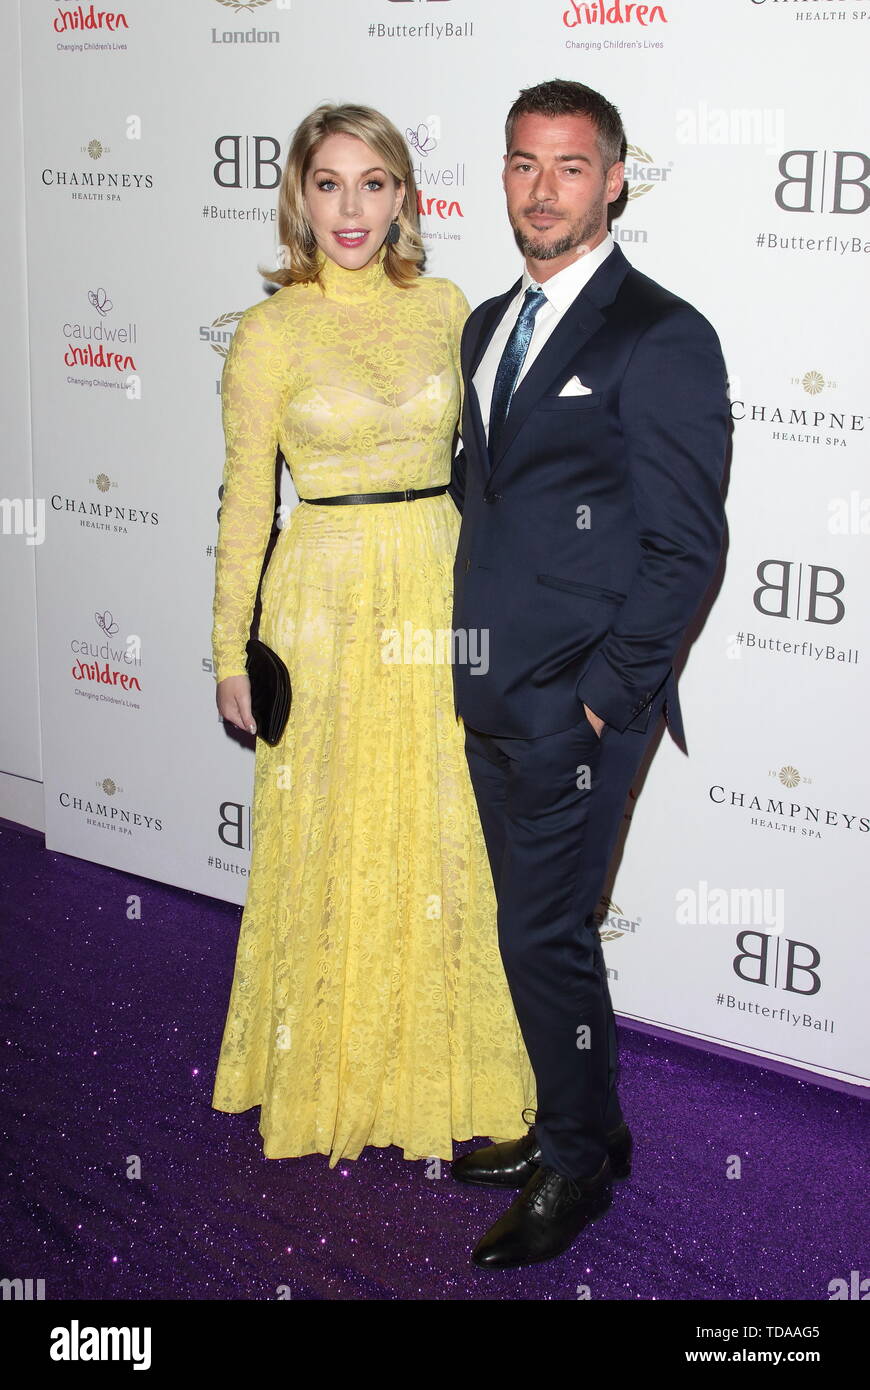 London, UK. 13th June, 2019. Katherine Ryan and Bobby Kootstra arrive for the Caudwell Children Butterfly Ball charity event at the Grosvenor House, Park Lane Credit: SOPA Images Limited/Alamy Live News Stock Photo